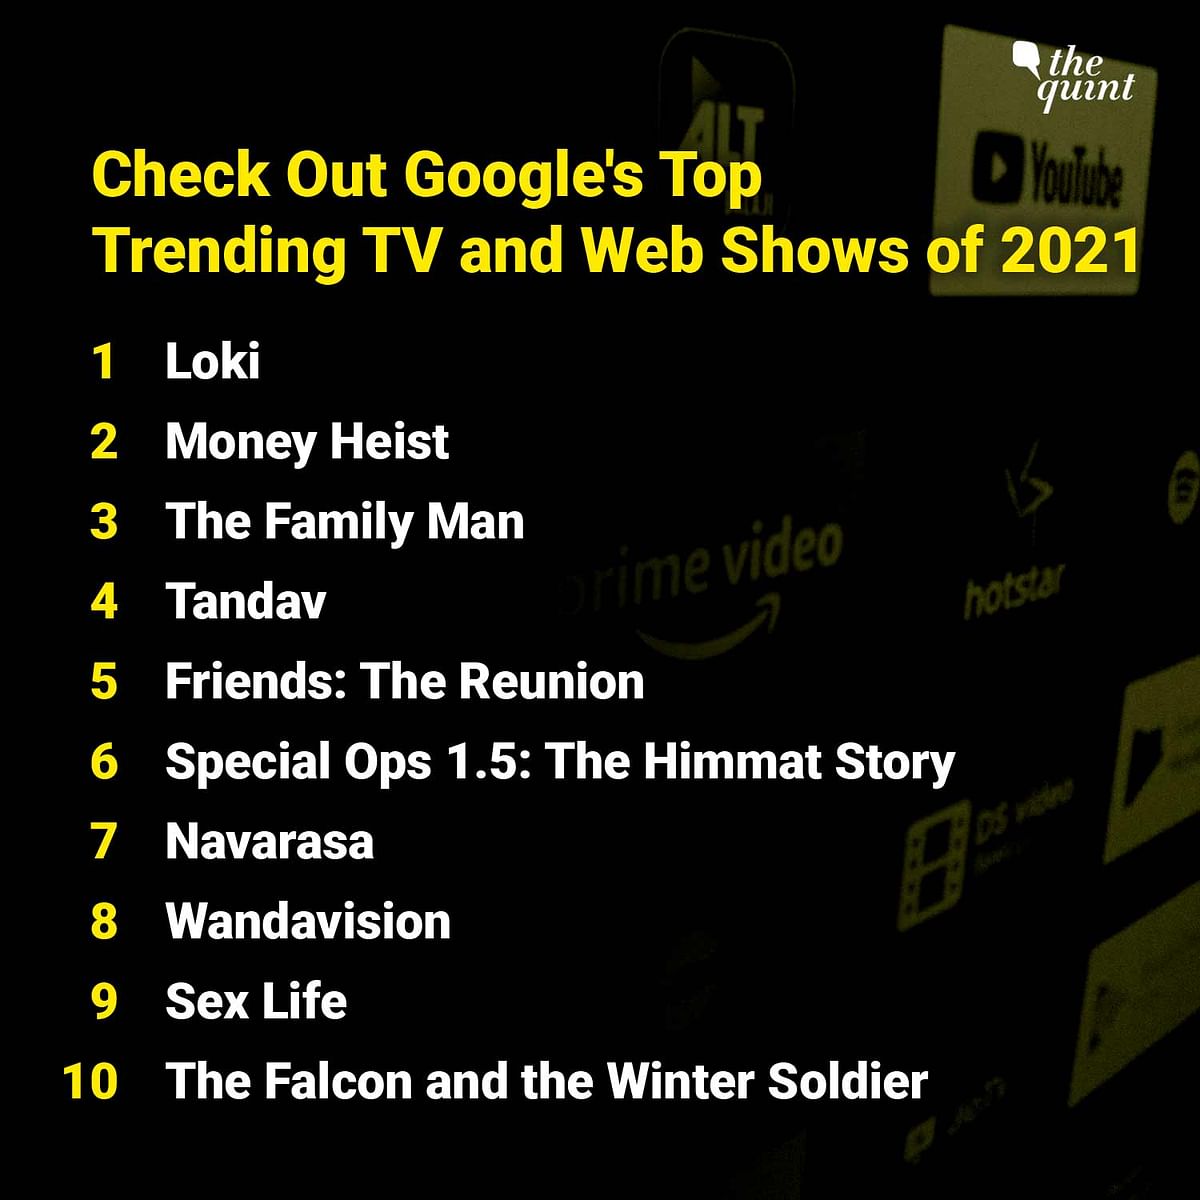 Marvel's 'Loki', 'Money Heist', and Manoj Bajpayee-starrer 'The Family Man' are Google's Top 3 shows of 2021.